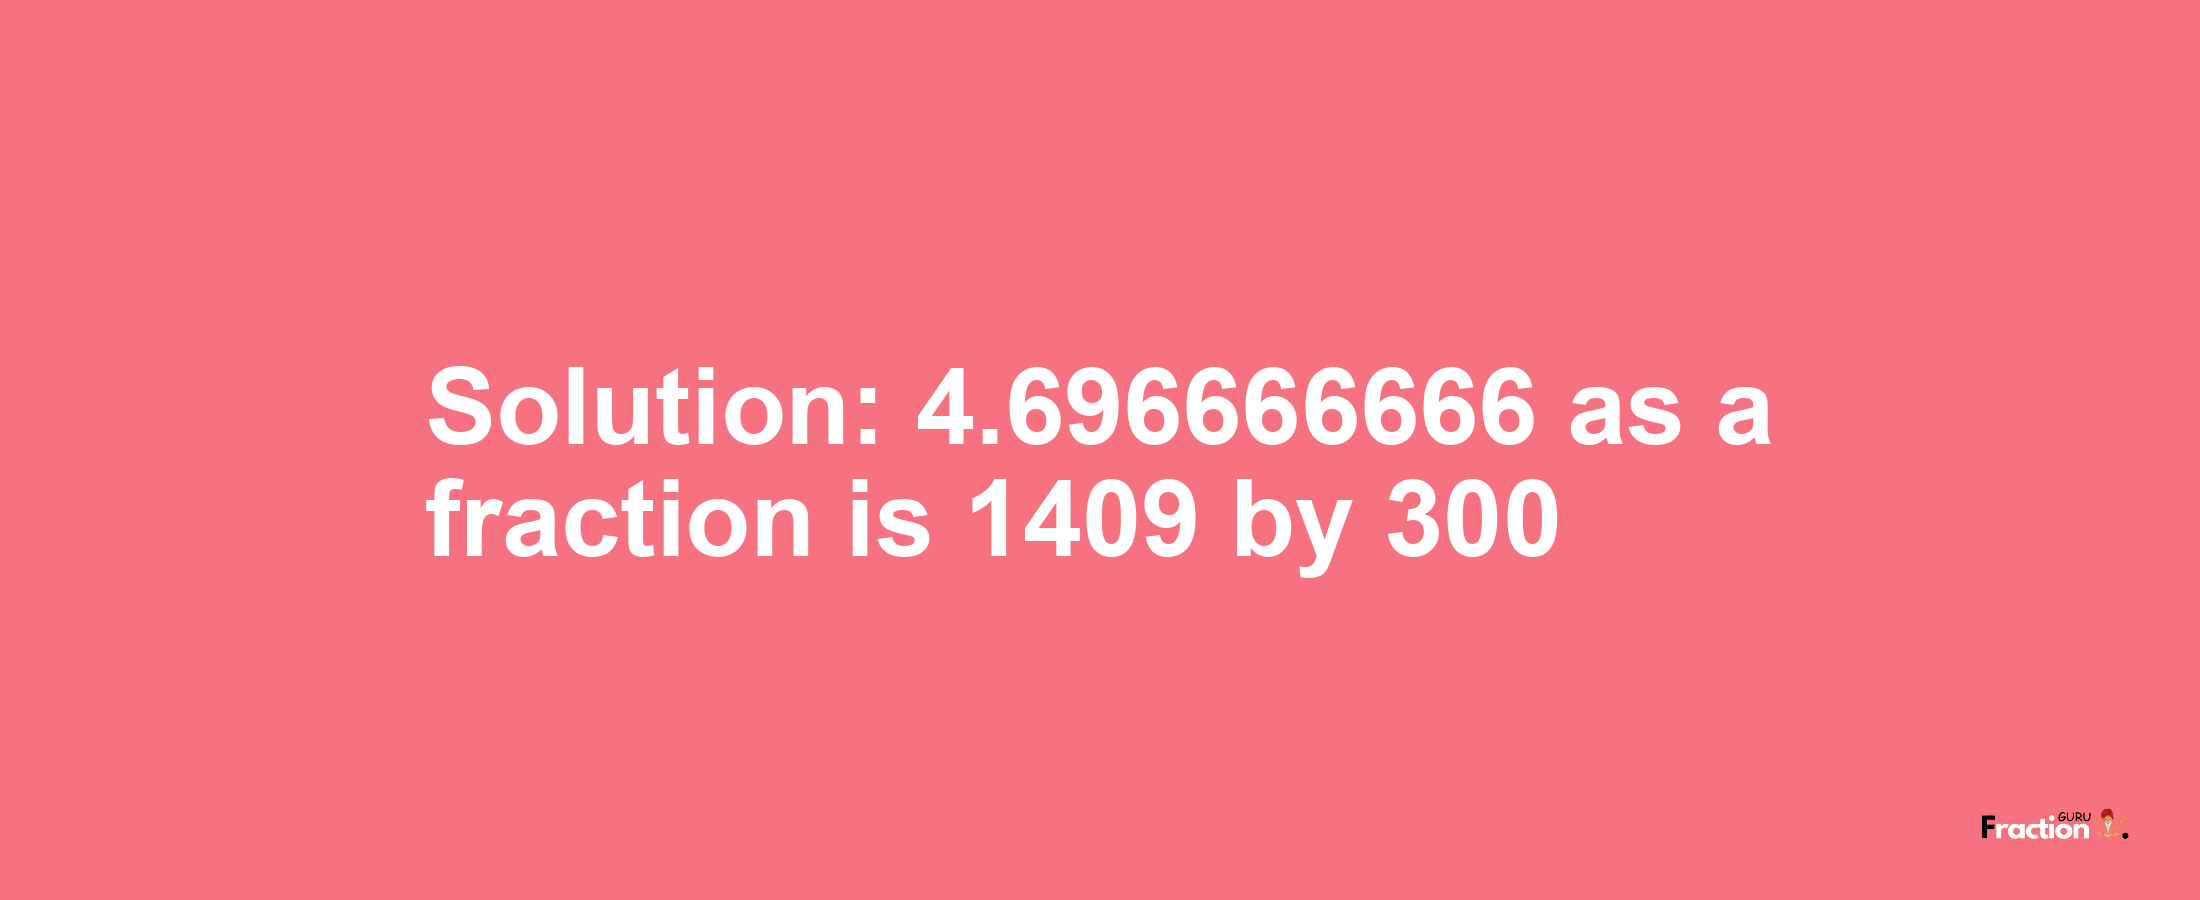 Solution:4.696666666 as a fraction is 1409/300